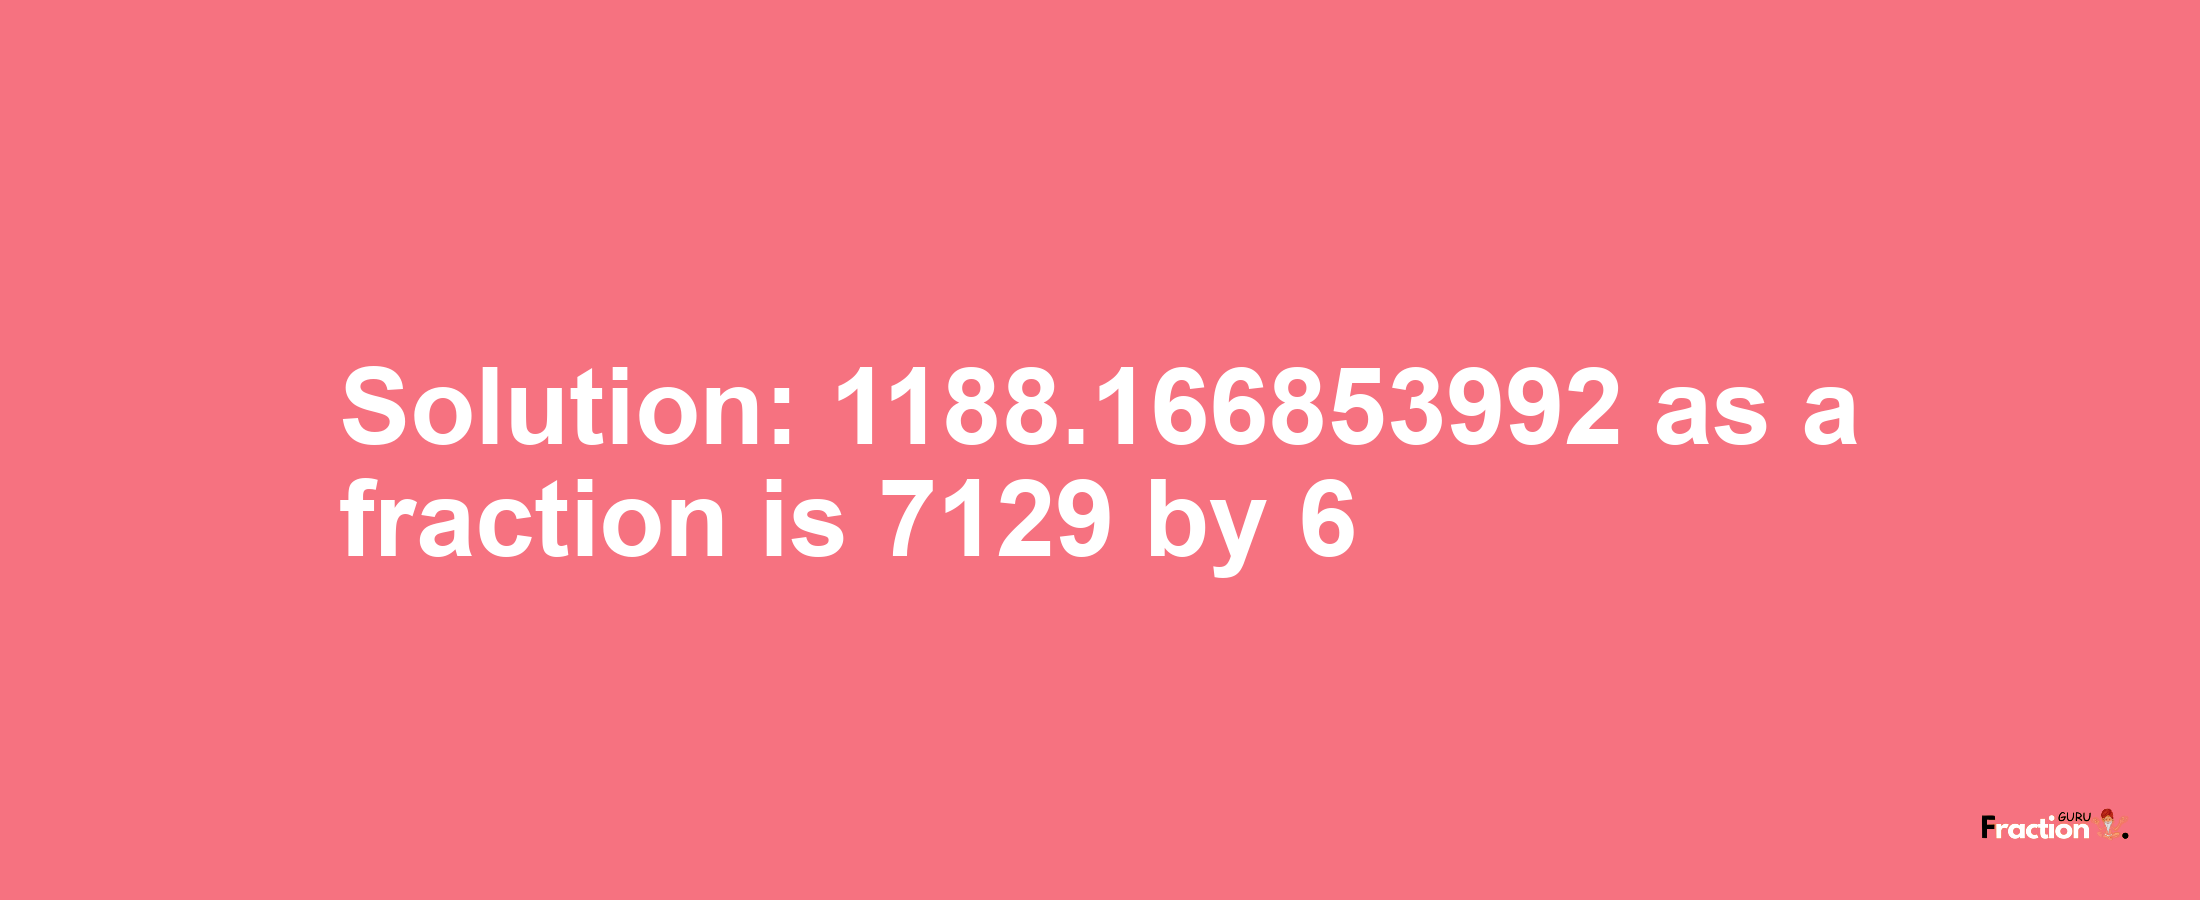 Solution:1188.166853992 as a fraction is 7129/6